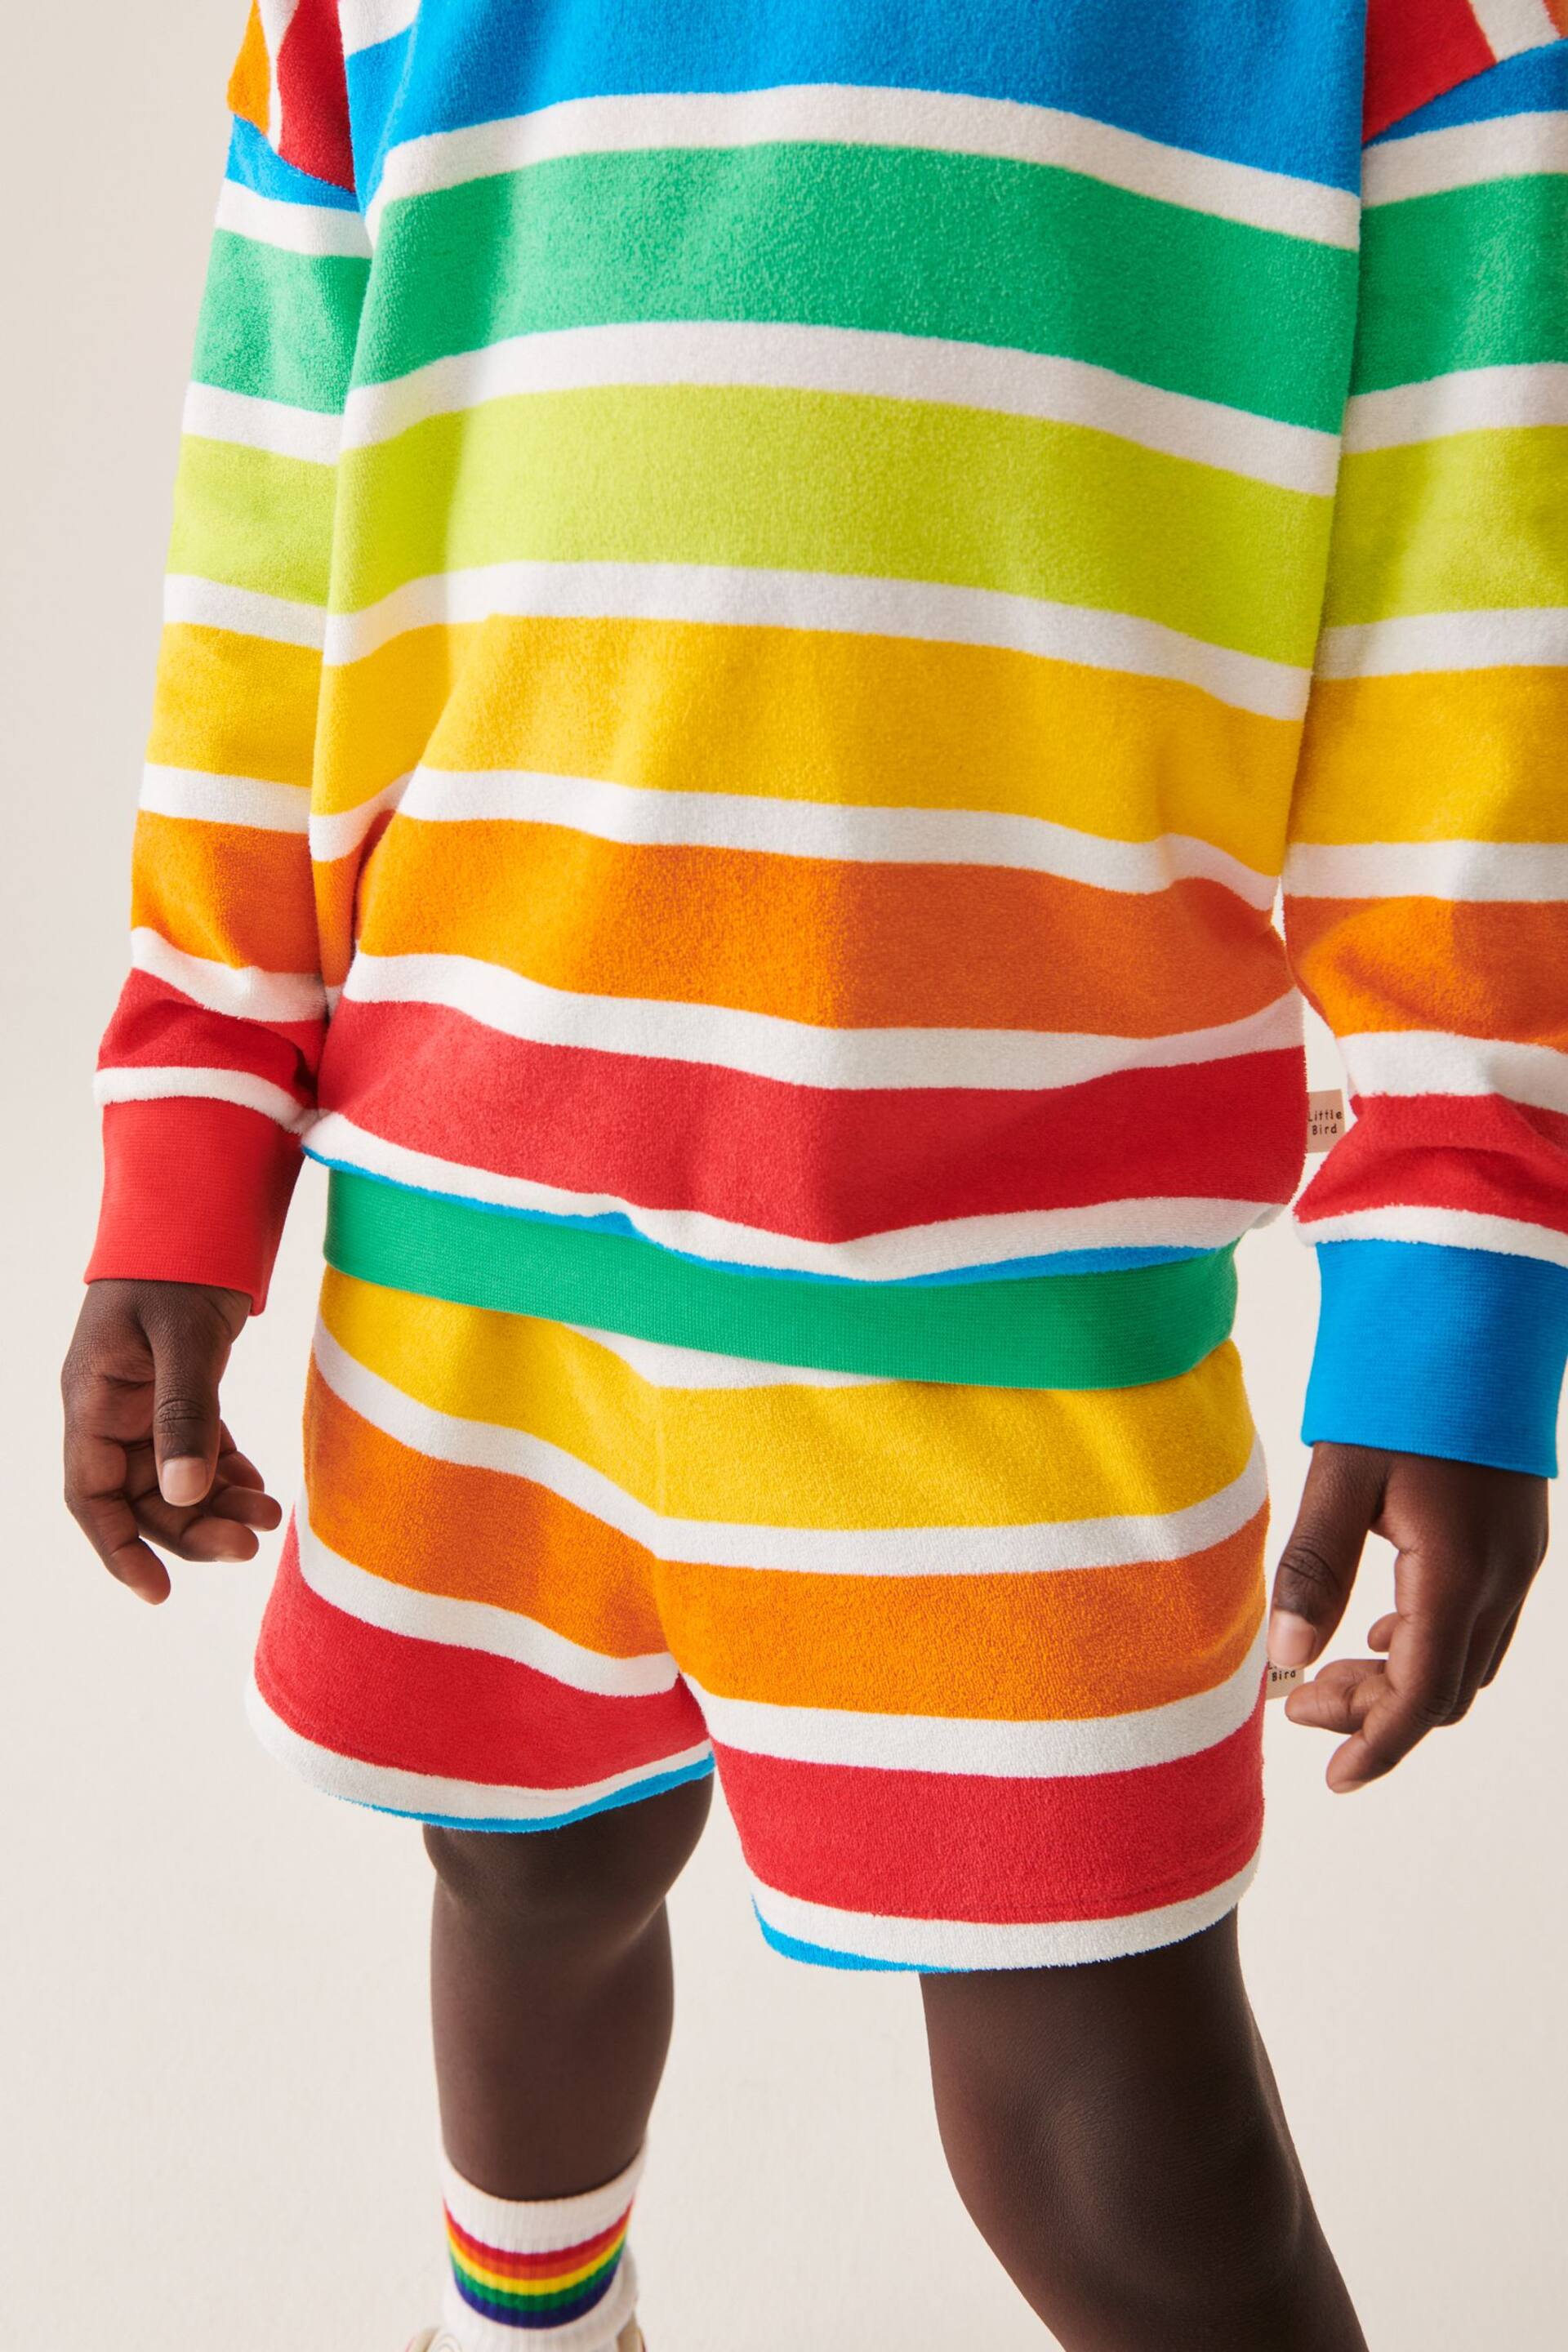 Little Bird by Jools Oliver Multi Bright Towelling Sweat Top and Short Set - Image 5 of 7